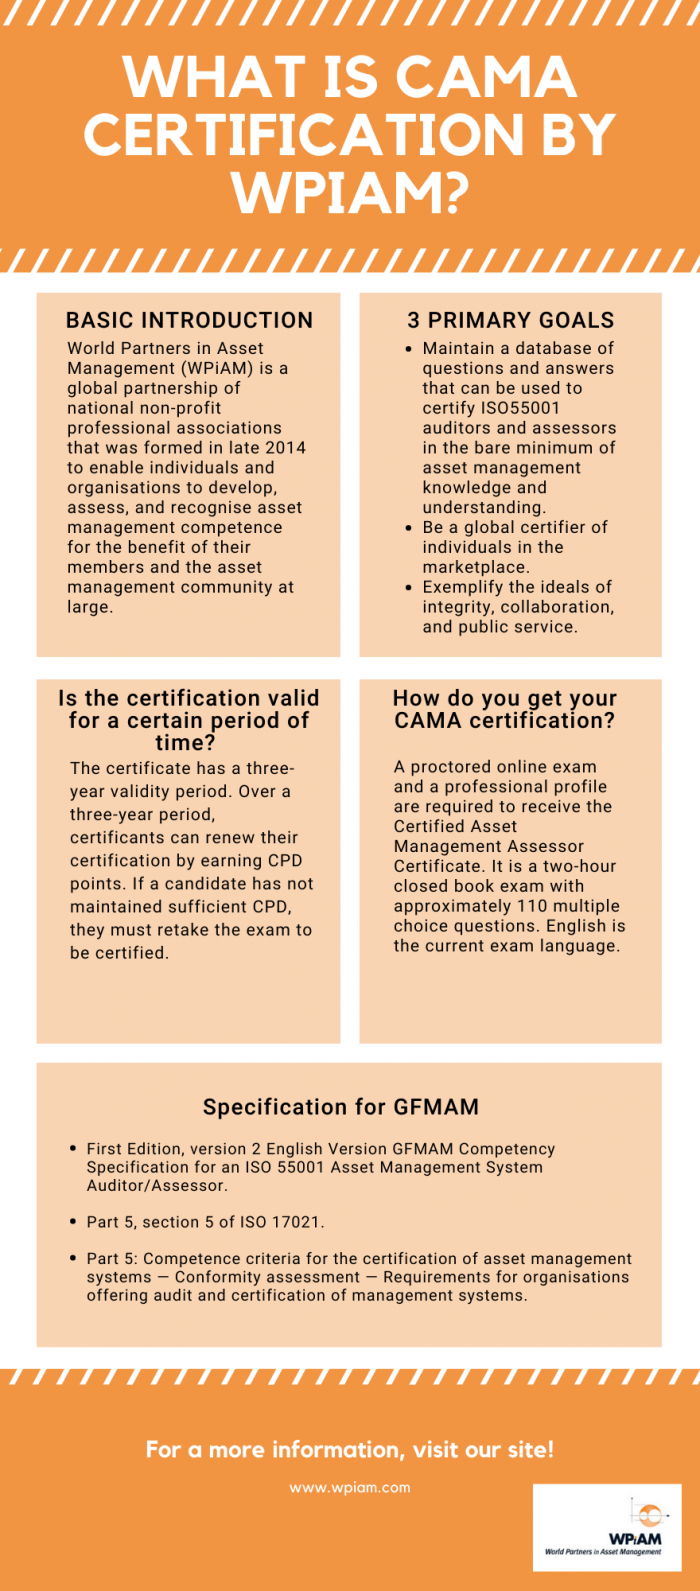 What is CAMA Certification by WPiAM?